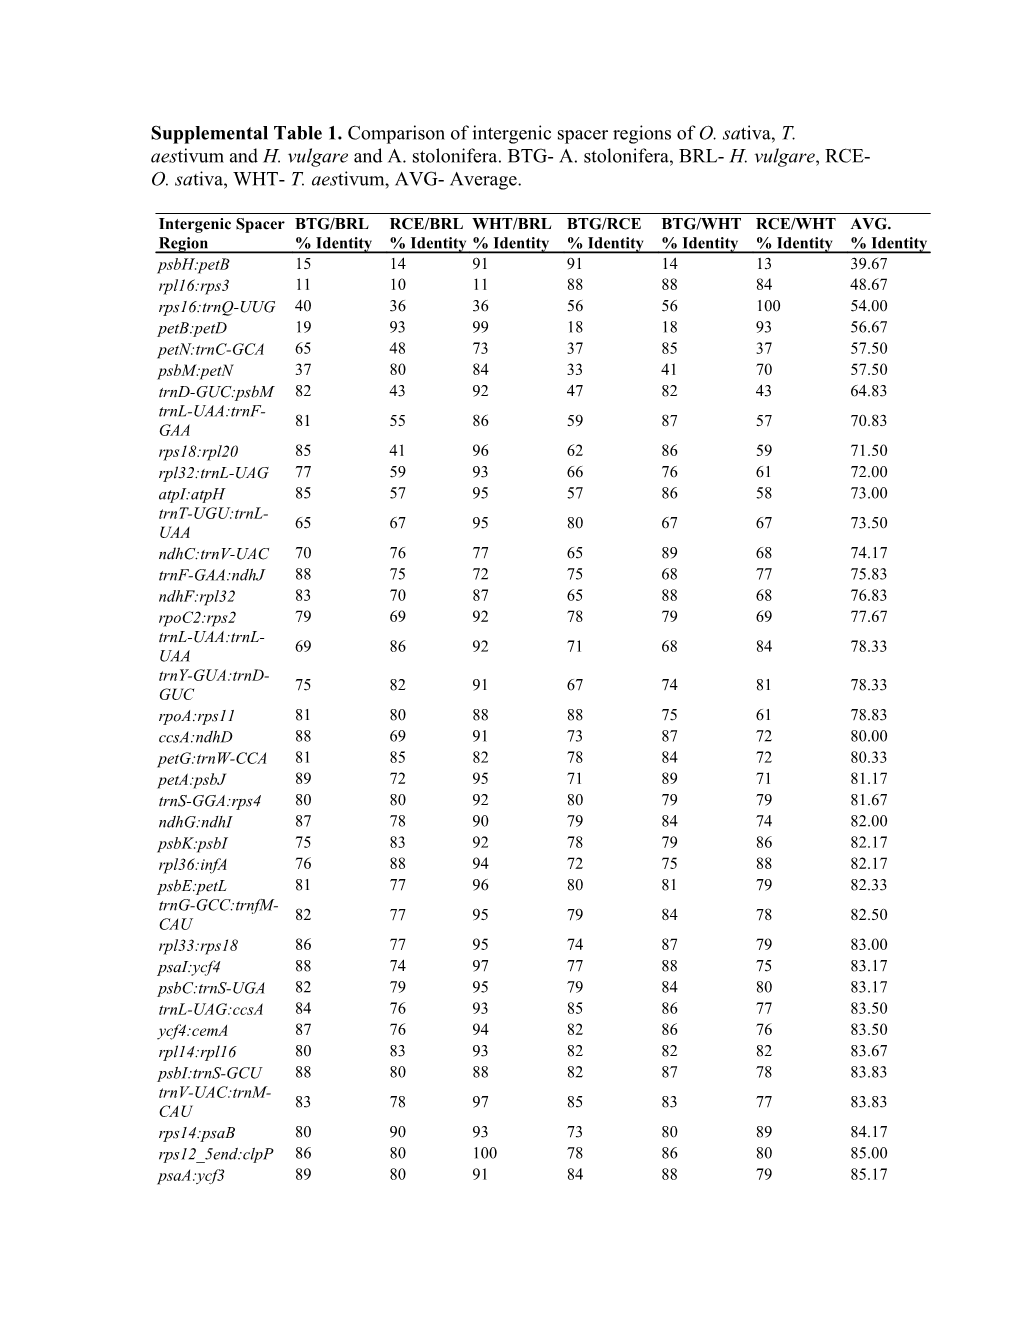 Supplemental Table 2. Comparison of Intergenic Spacer Regions of Maize, Sorghum and Sugarcane